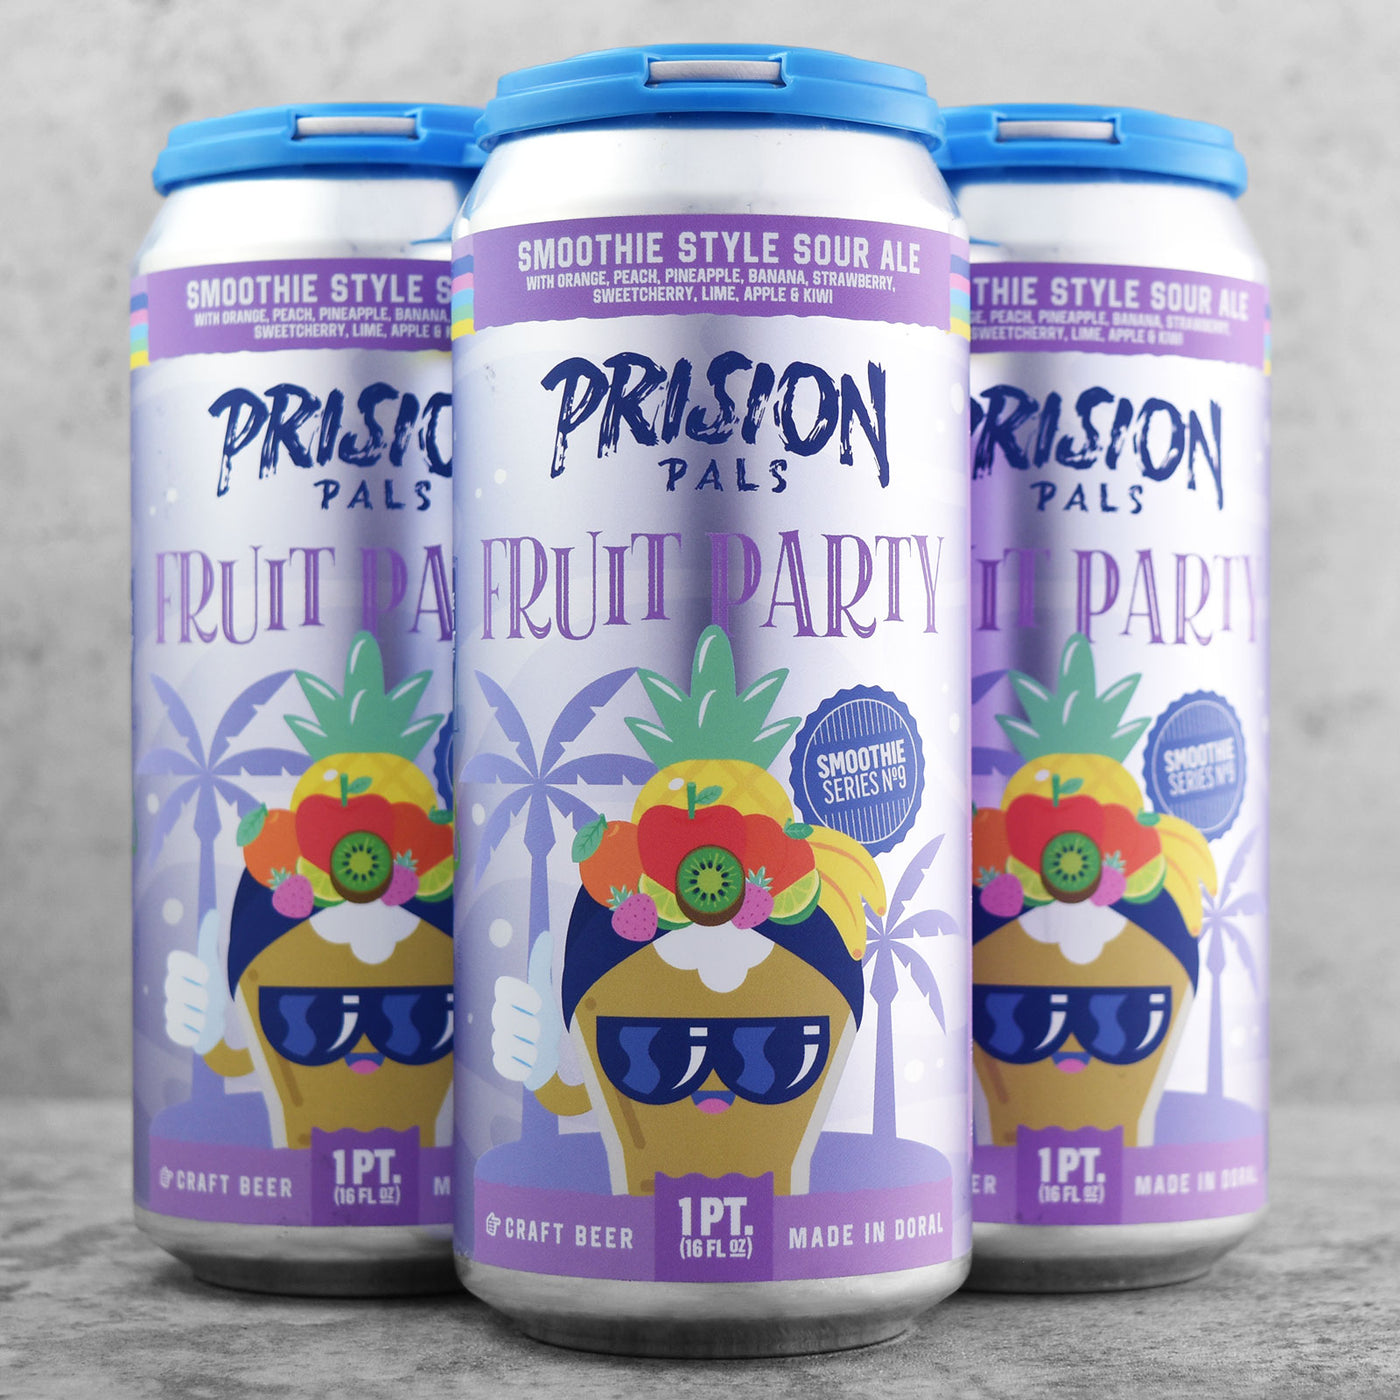 Prision Pals Fruit Party - Smoothie Series No. 9